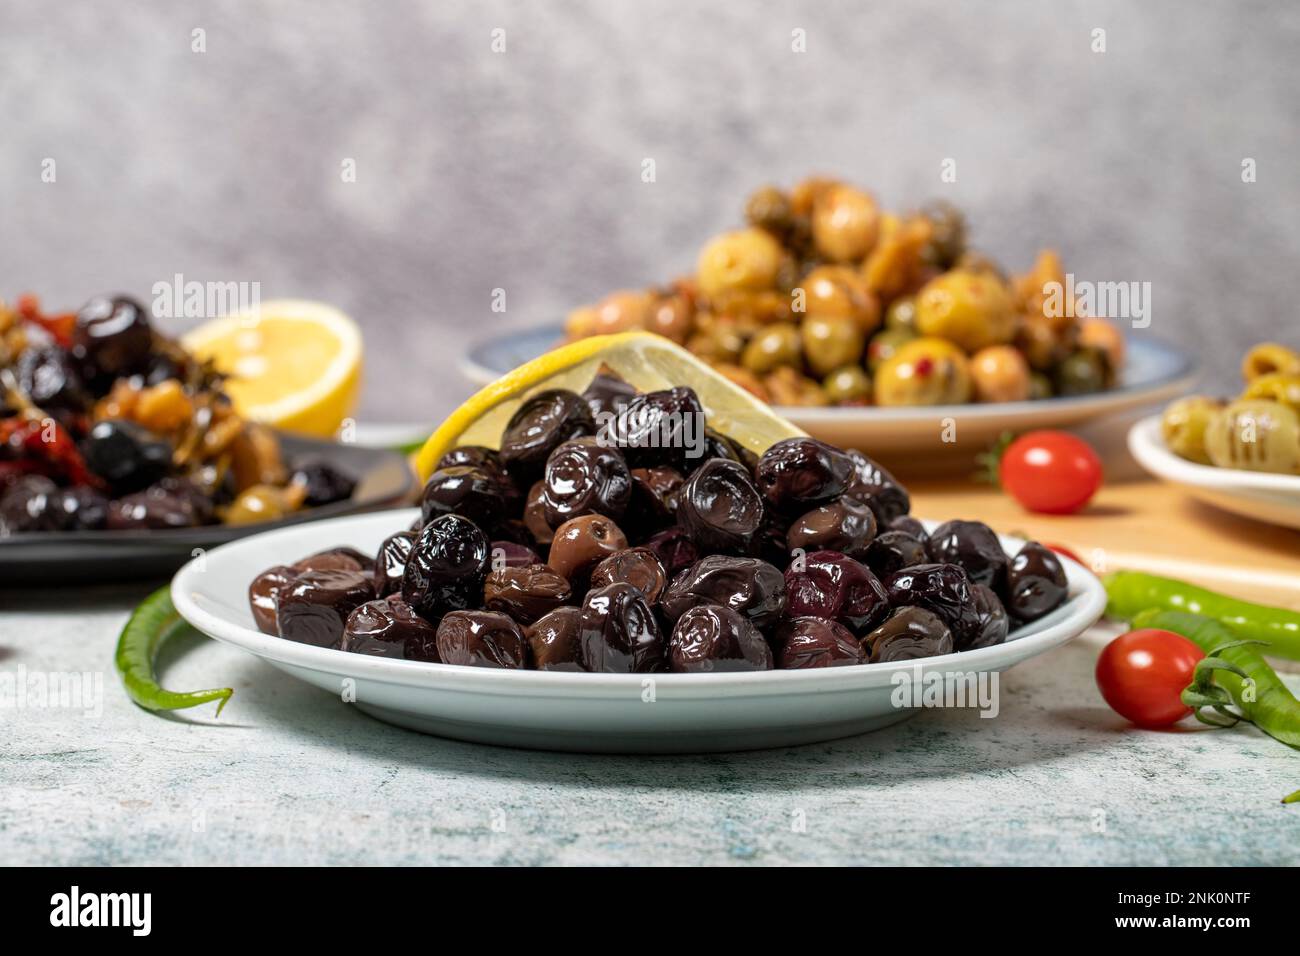 Olive varieties. Assortment of black and green olives on plate on gray background. low angle view Stock Photo